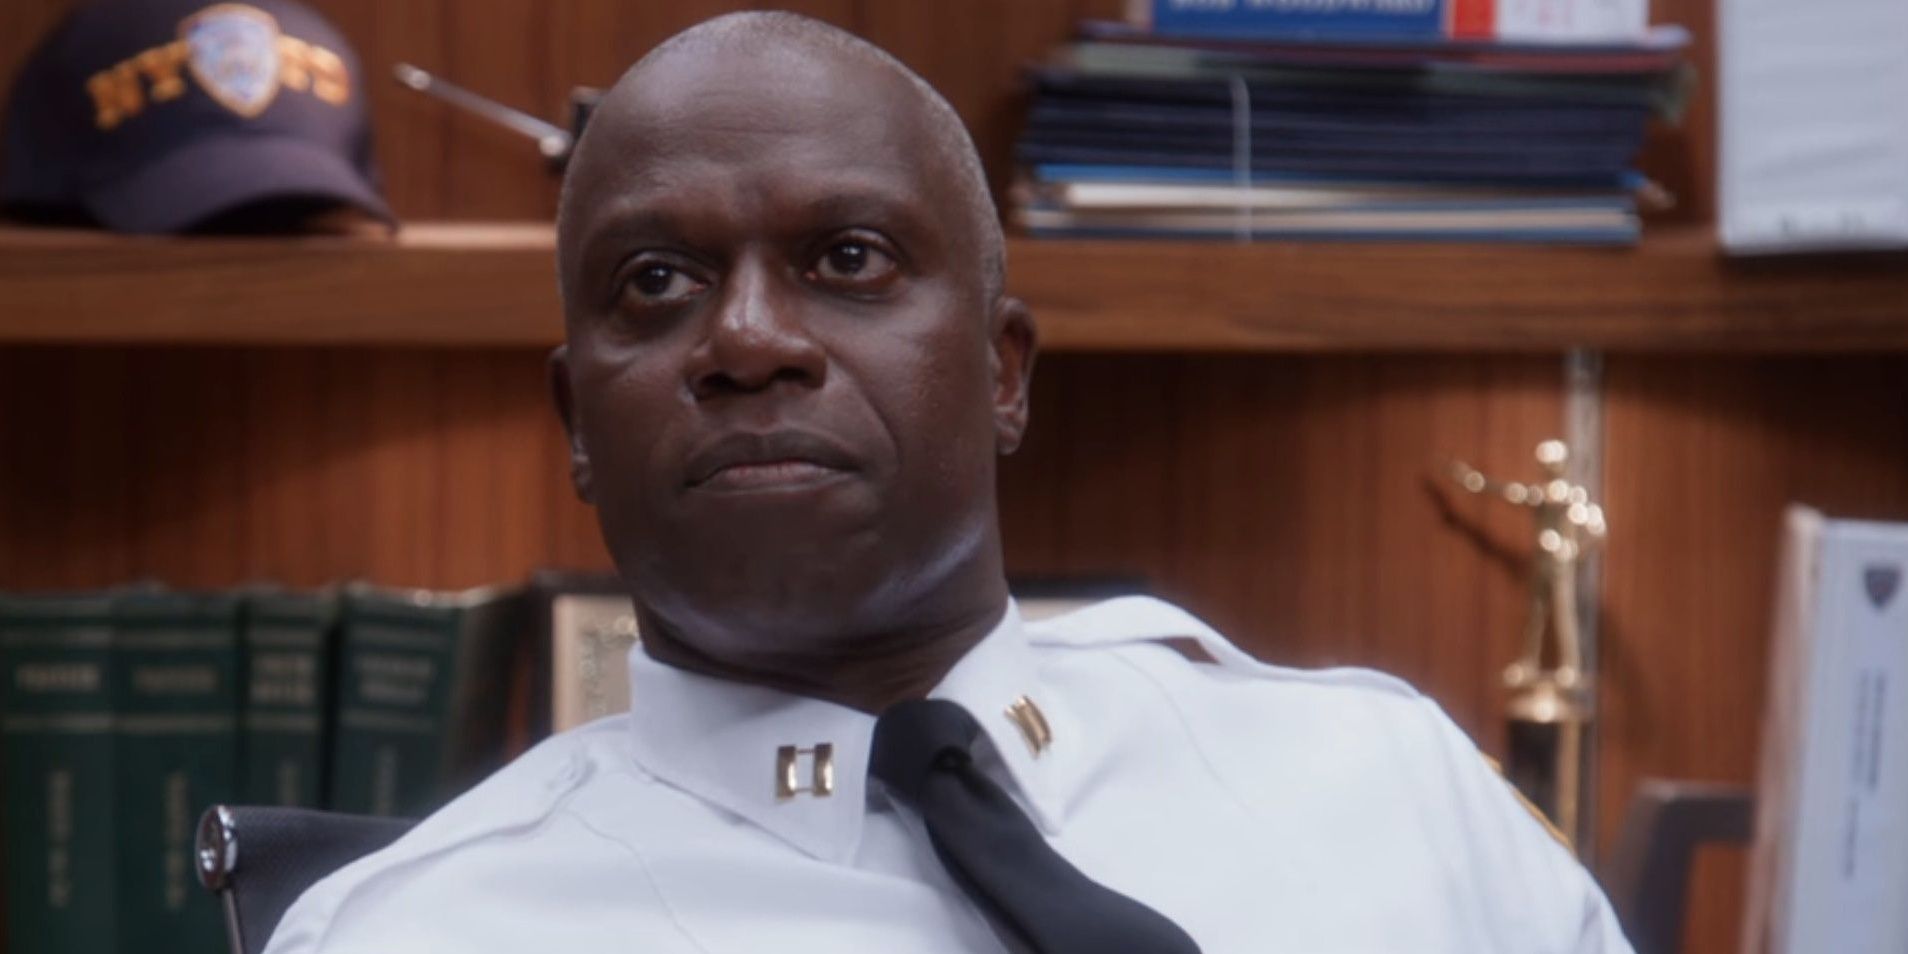 Captain Holt sitting at his desk and looking up in Brooklyn Nine Nine